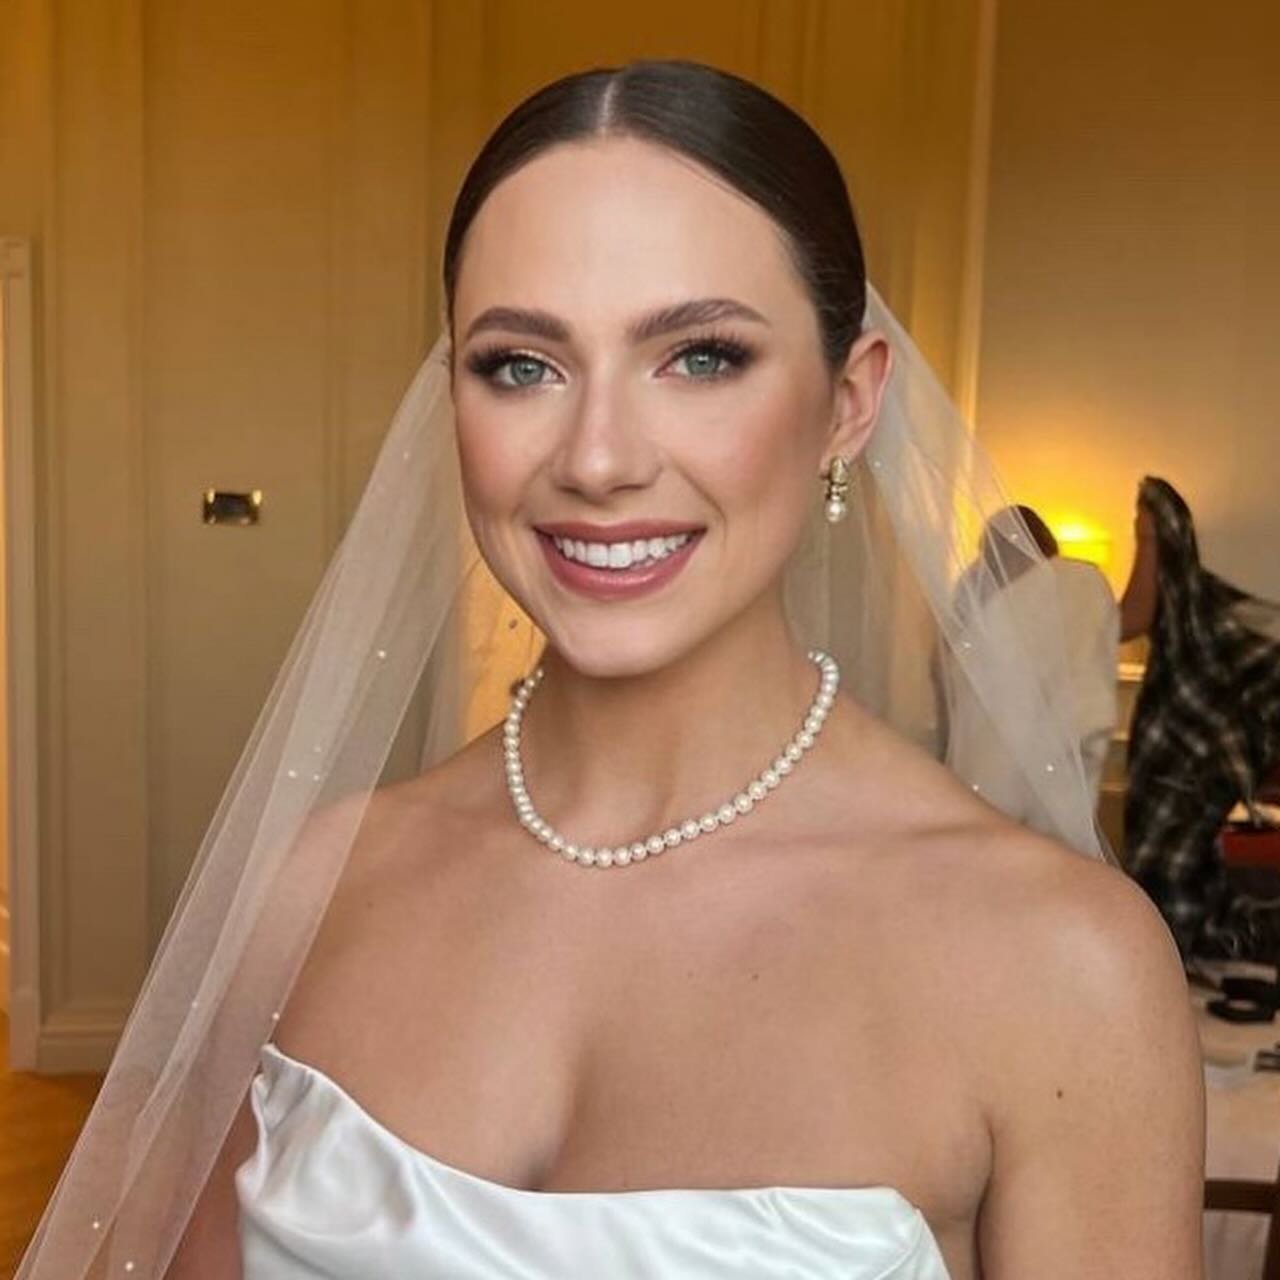 Swipe to see the enchanting transformation of the beautiful Cate on her wedding day! Nestled in the heart of Rome, I had the pleasure of crafting her bridal look.

✨ Hair and Makeup: It was all about elegance and romance. We chose a classic updo that